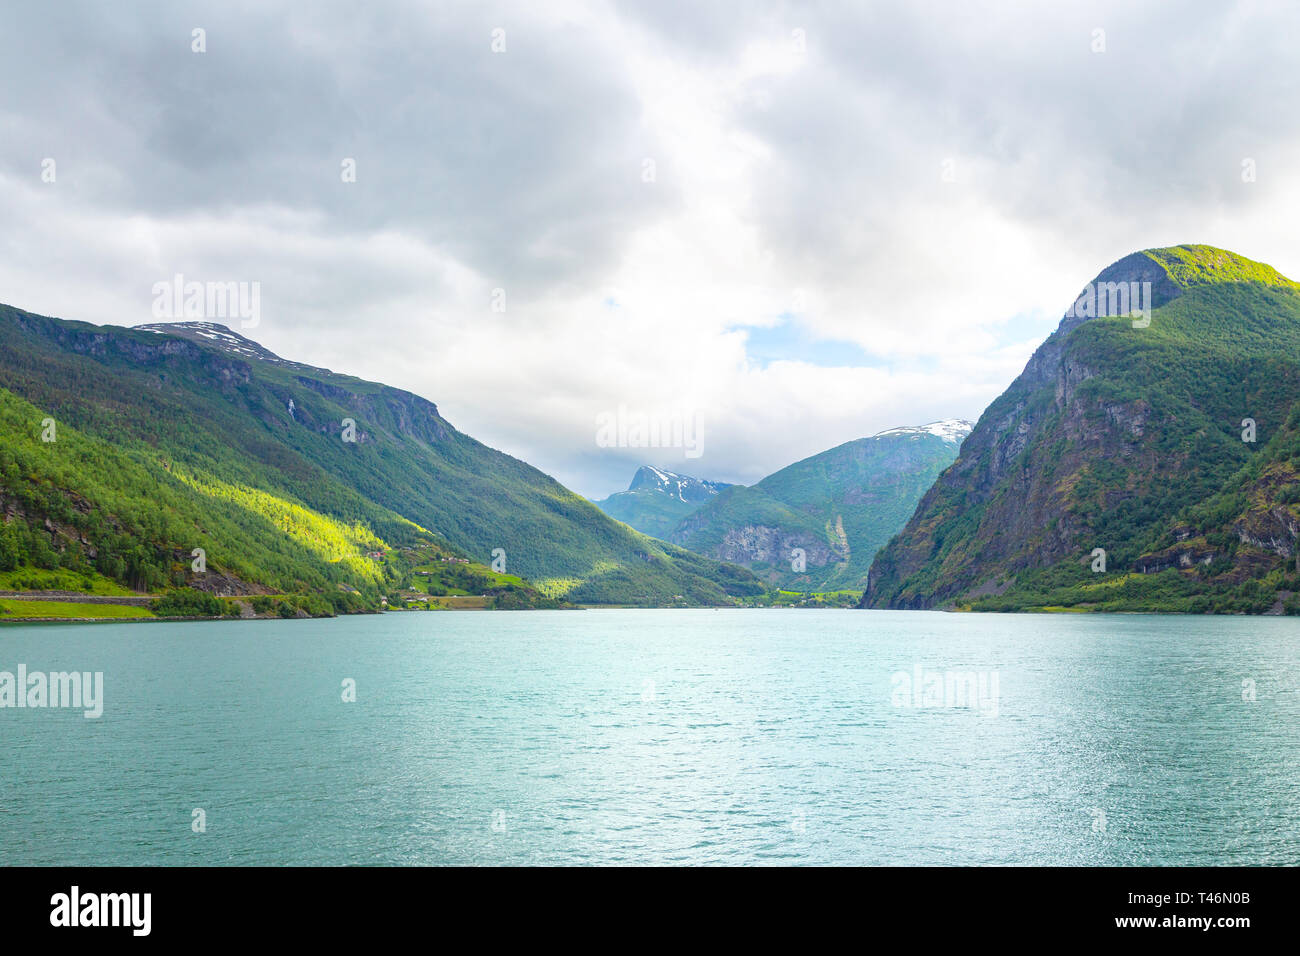 Panoramic view of Geiranger fjord near Geiranger seaport, Norway. Norway nature and travel background. View from the ferry on the fjord in Norway. Stock Photo